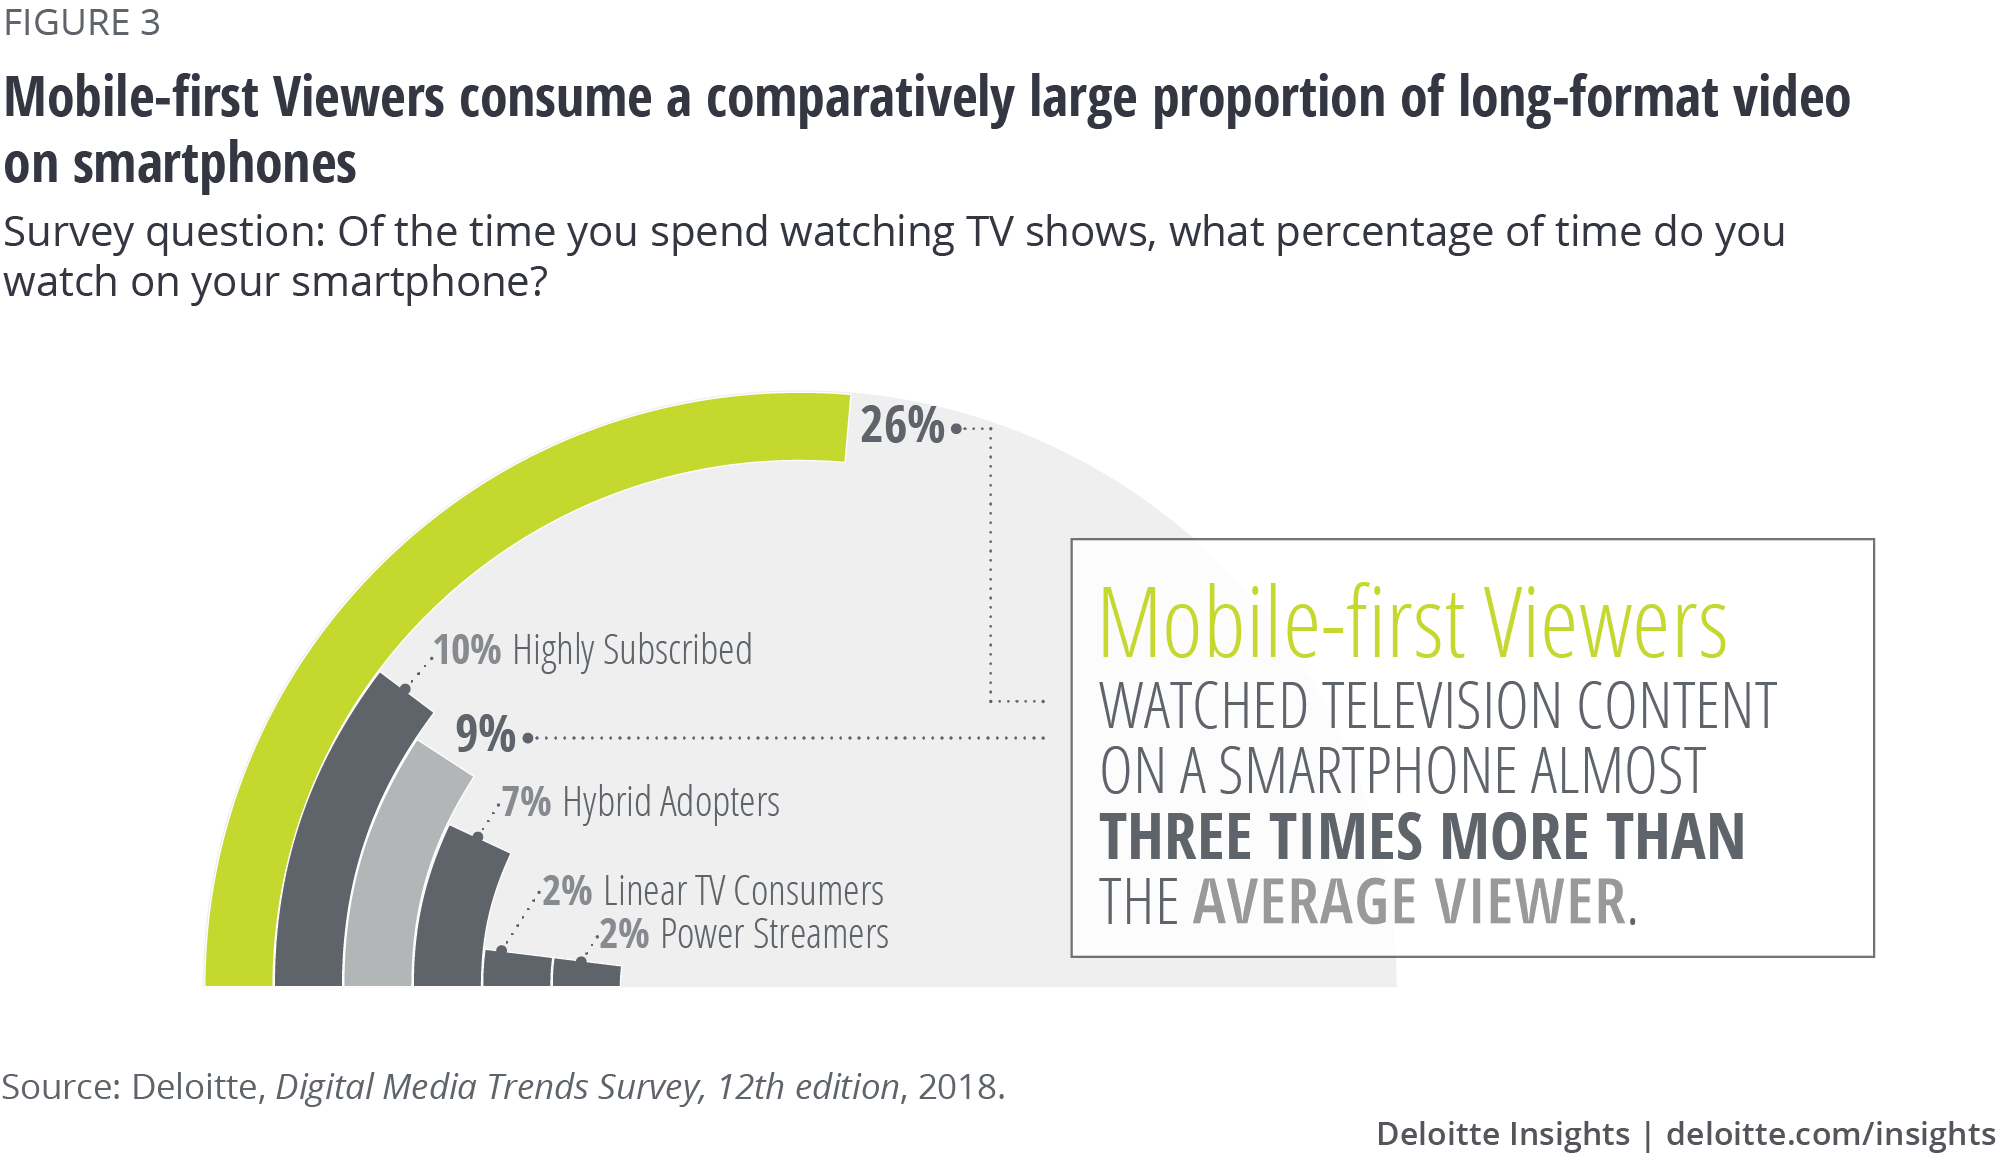 Mobile-first Viewers consume a comparatively large proportion of long-format video on smartphones